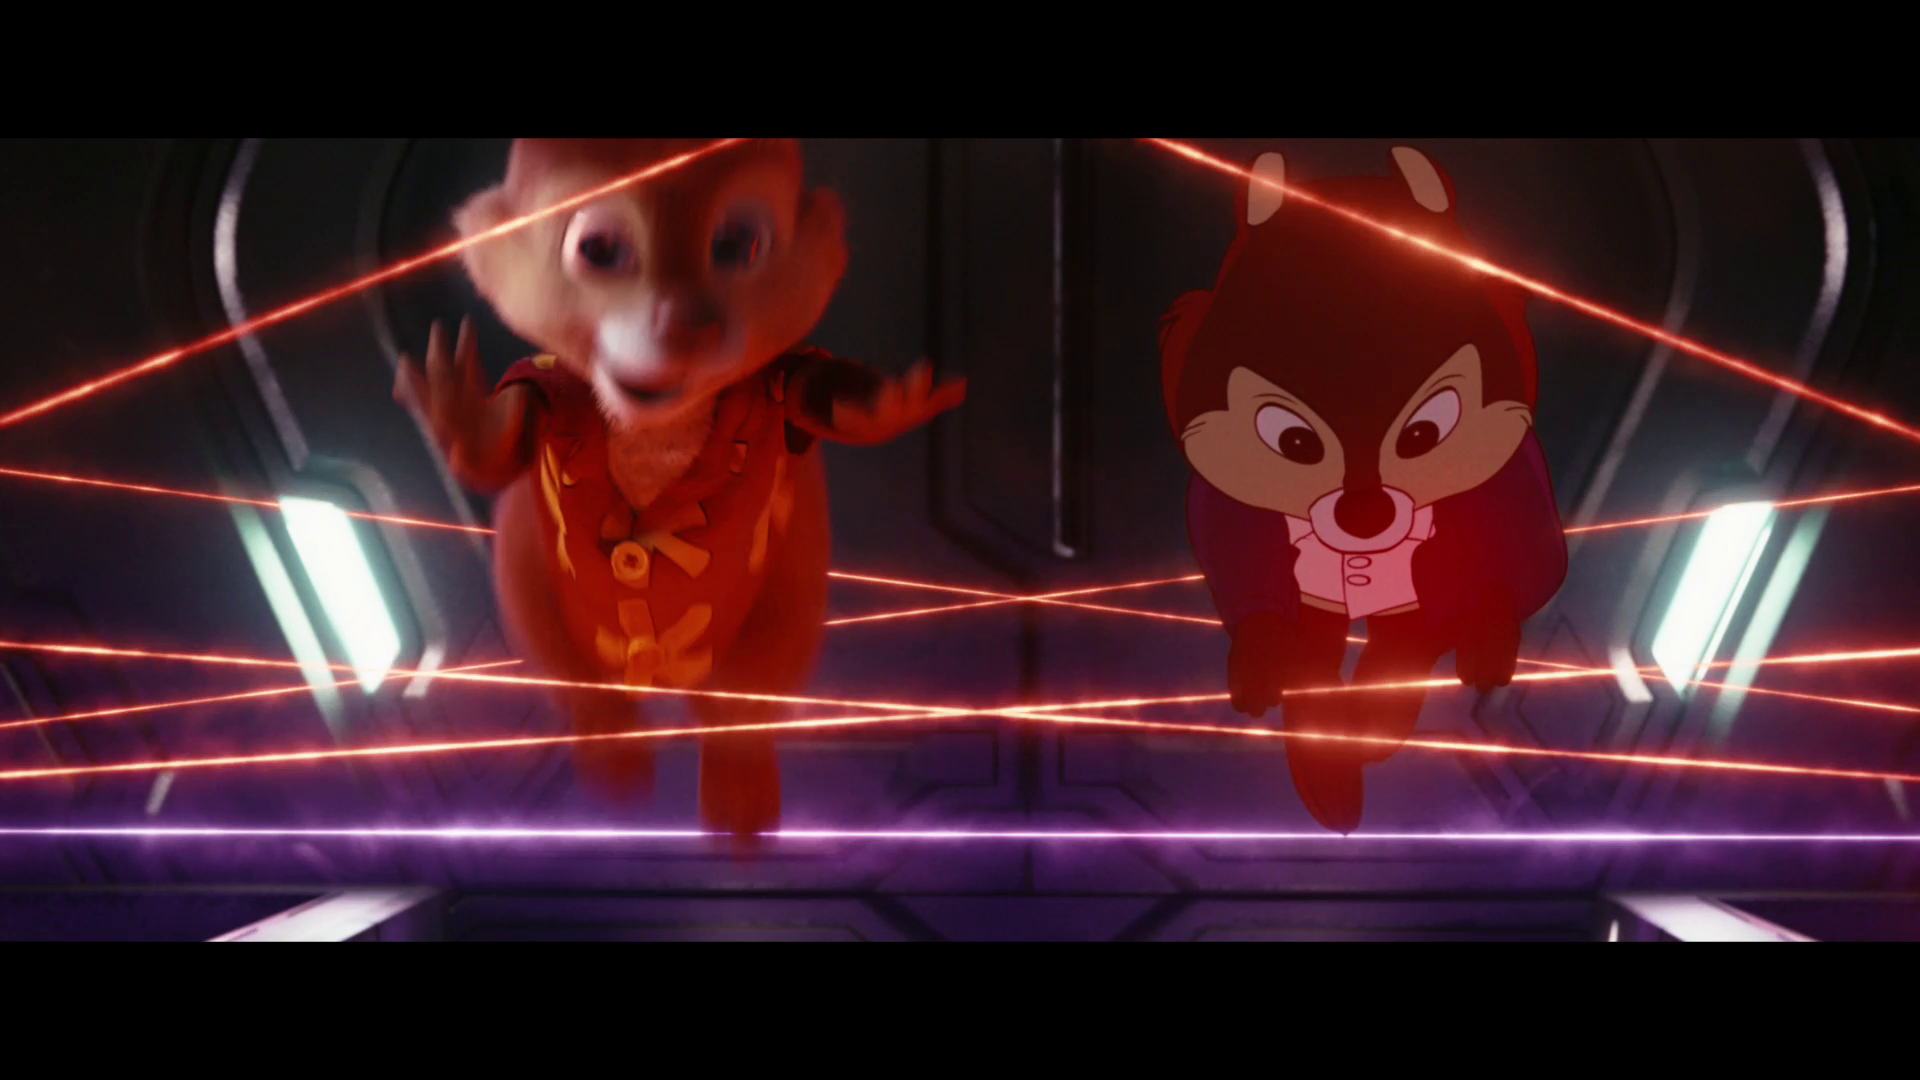 R Do my best Confirmation Review: New Chip 'N Dale movie hilariously spoofs classic games, cartoons |  Ars Technica